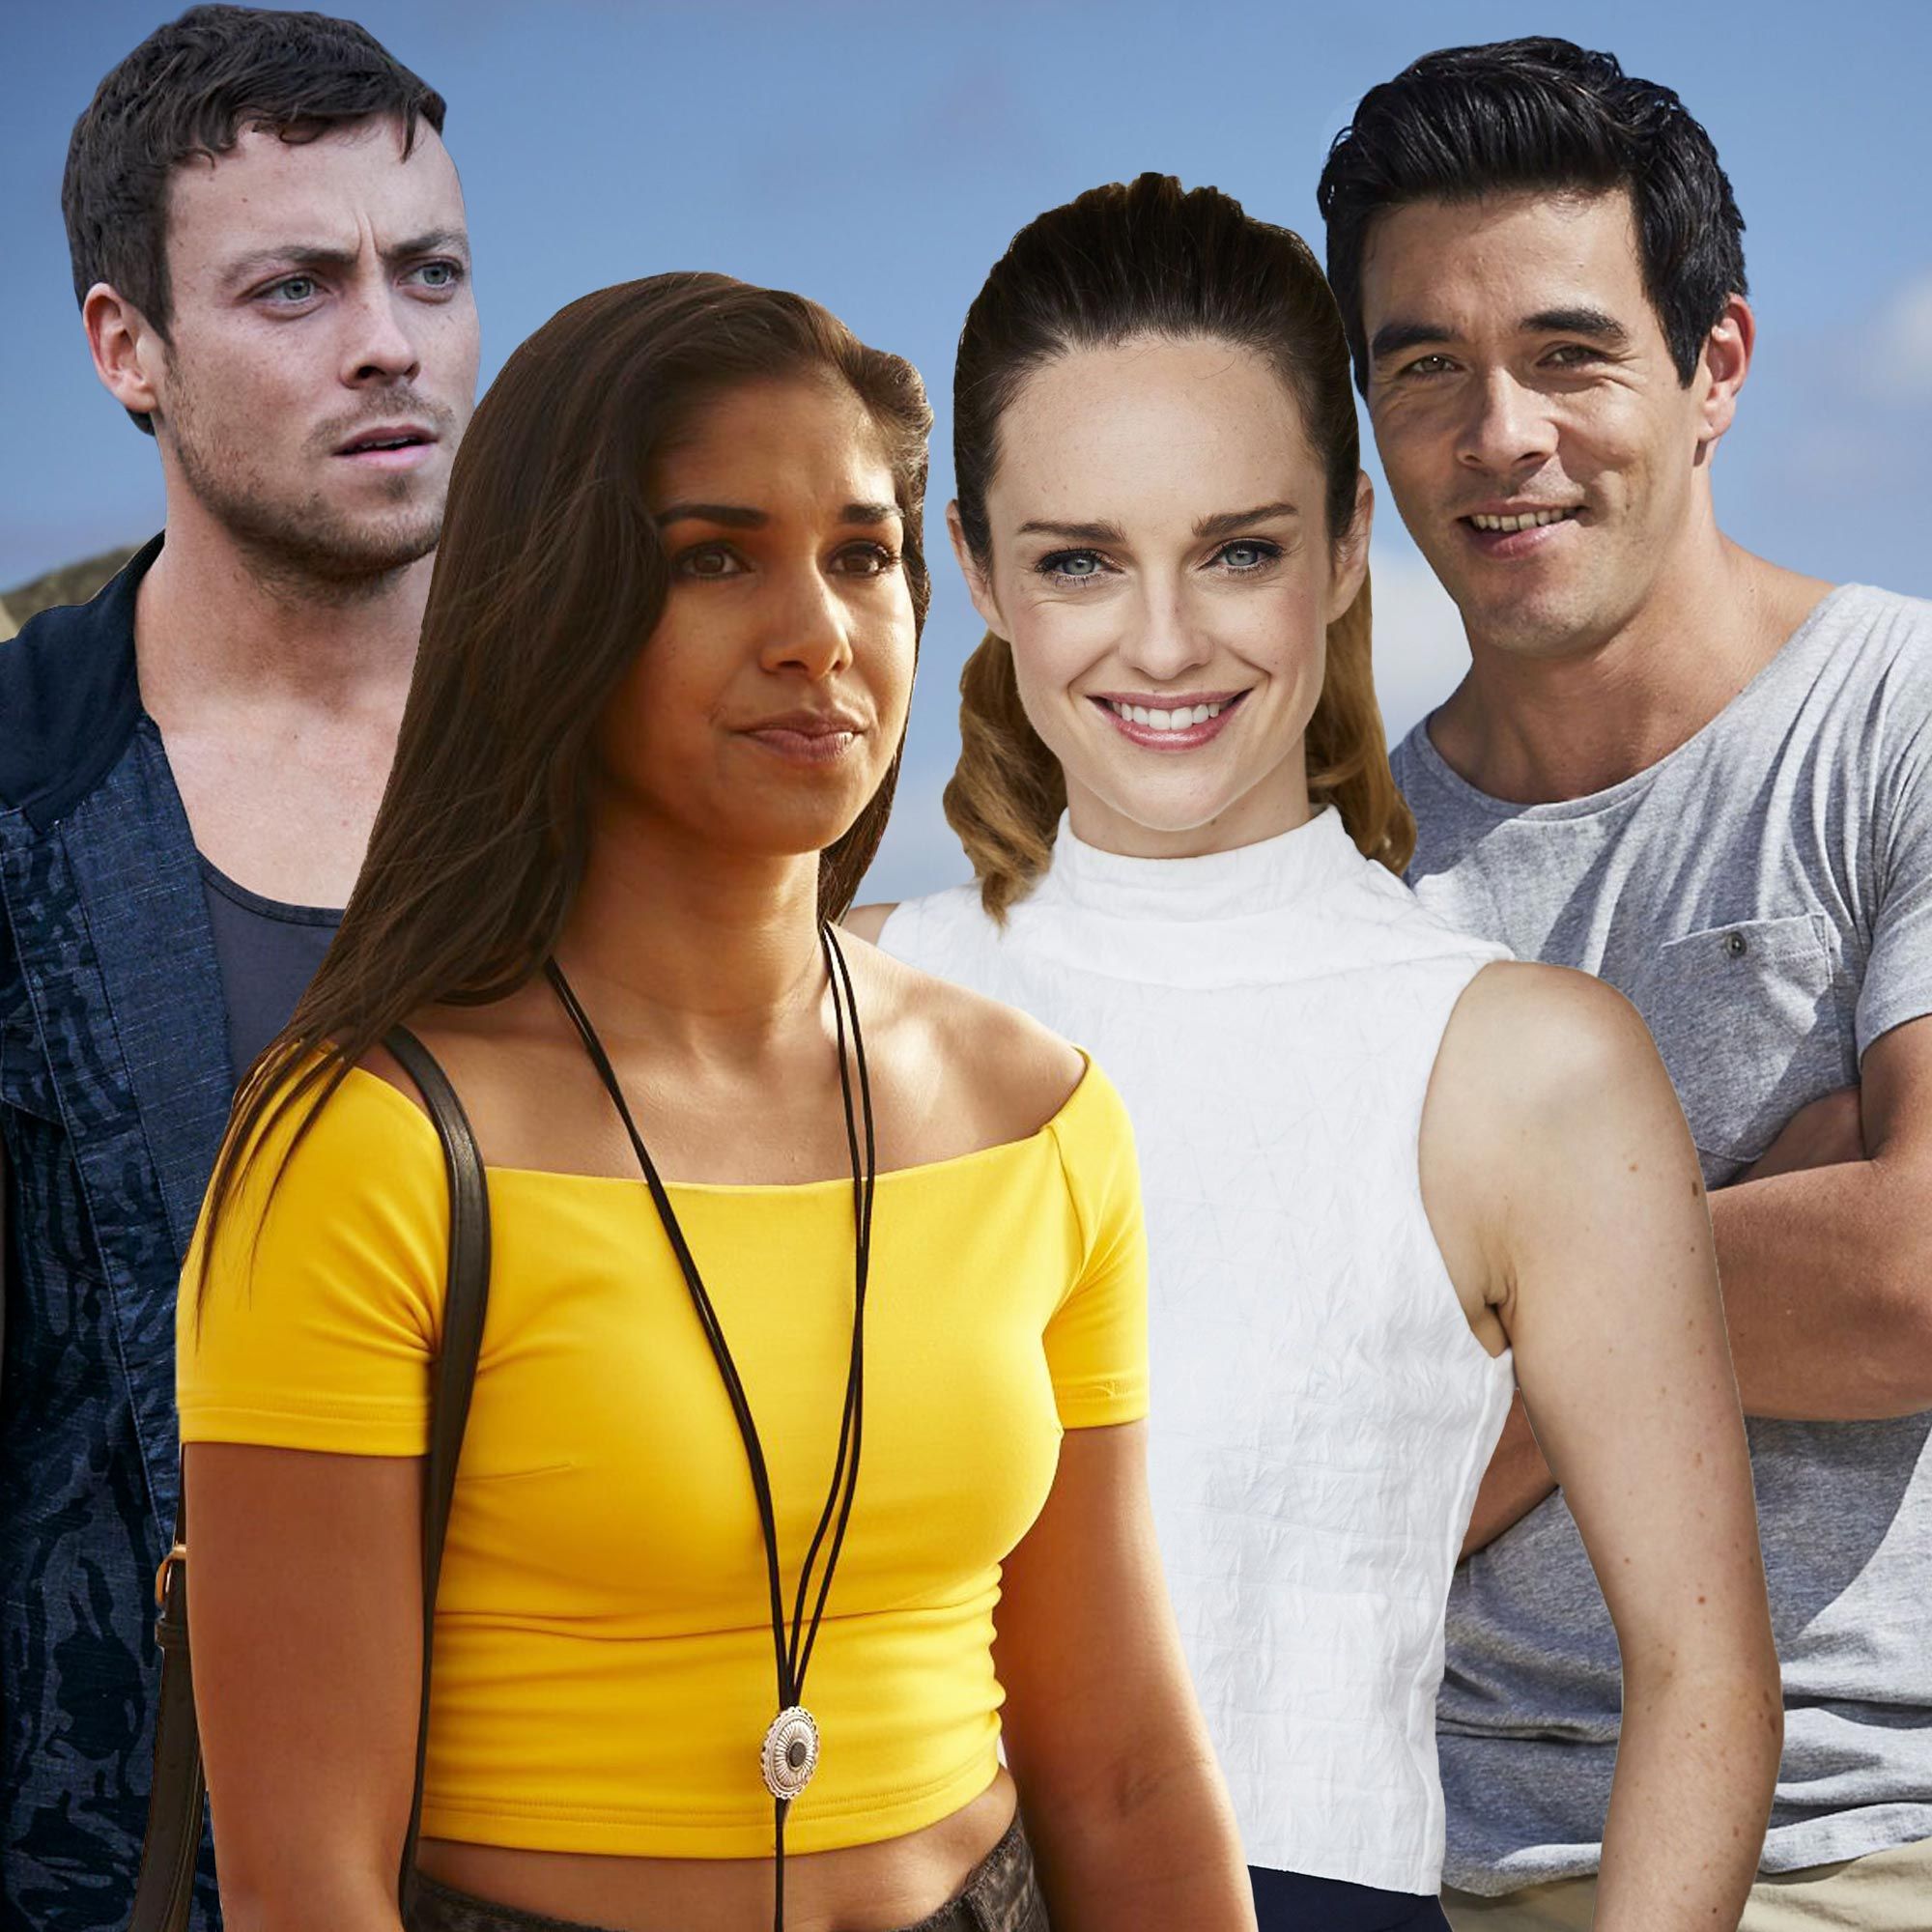 Home And Away Spoilers February 17 To 21